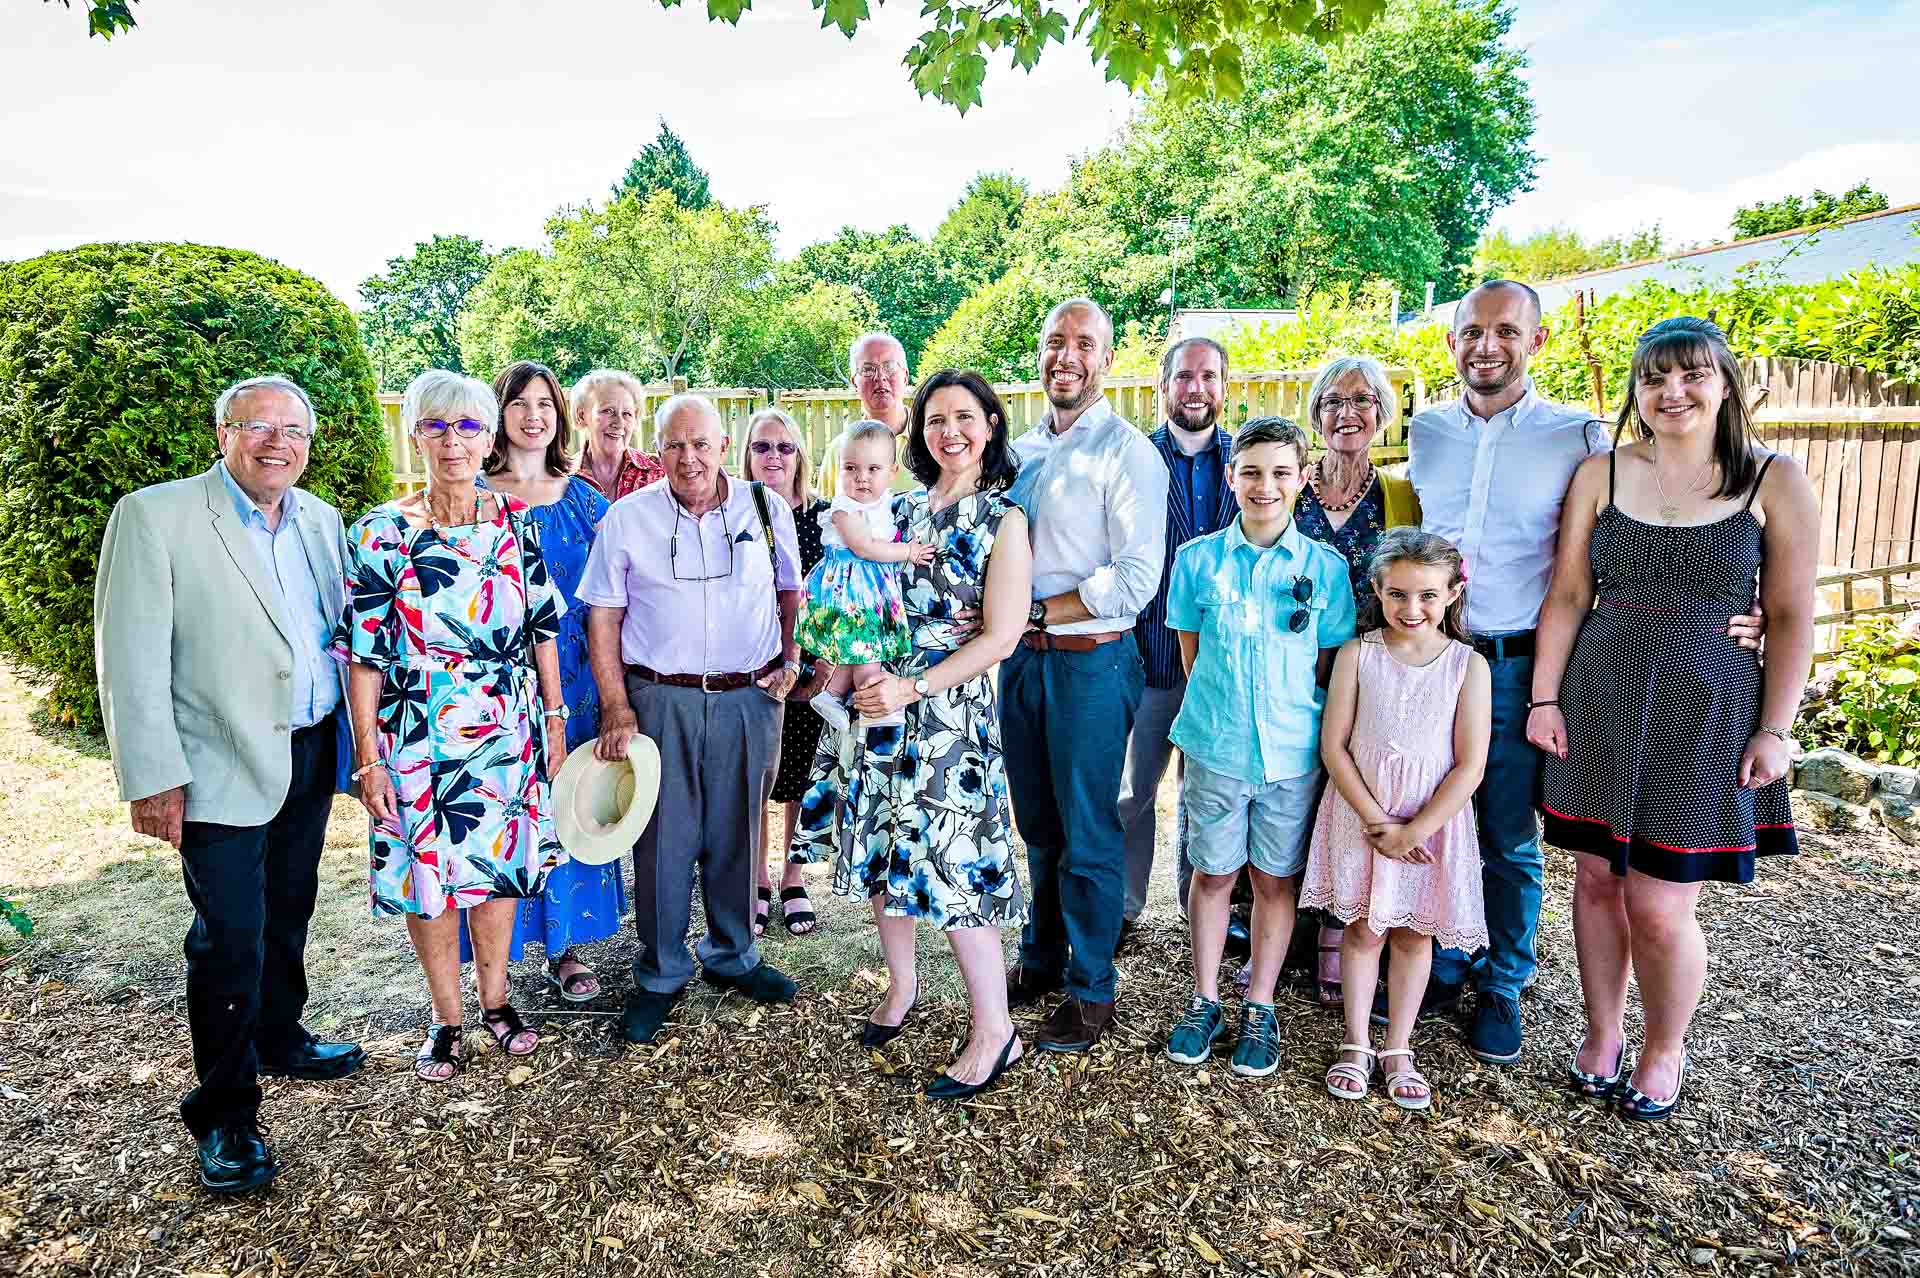 Group photo of family under tress at baby naming ceremony